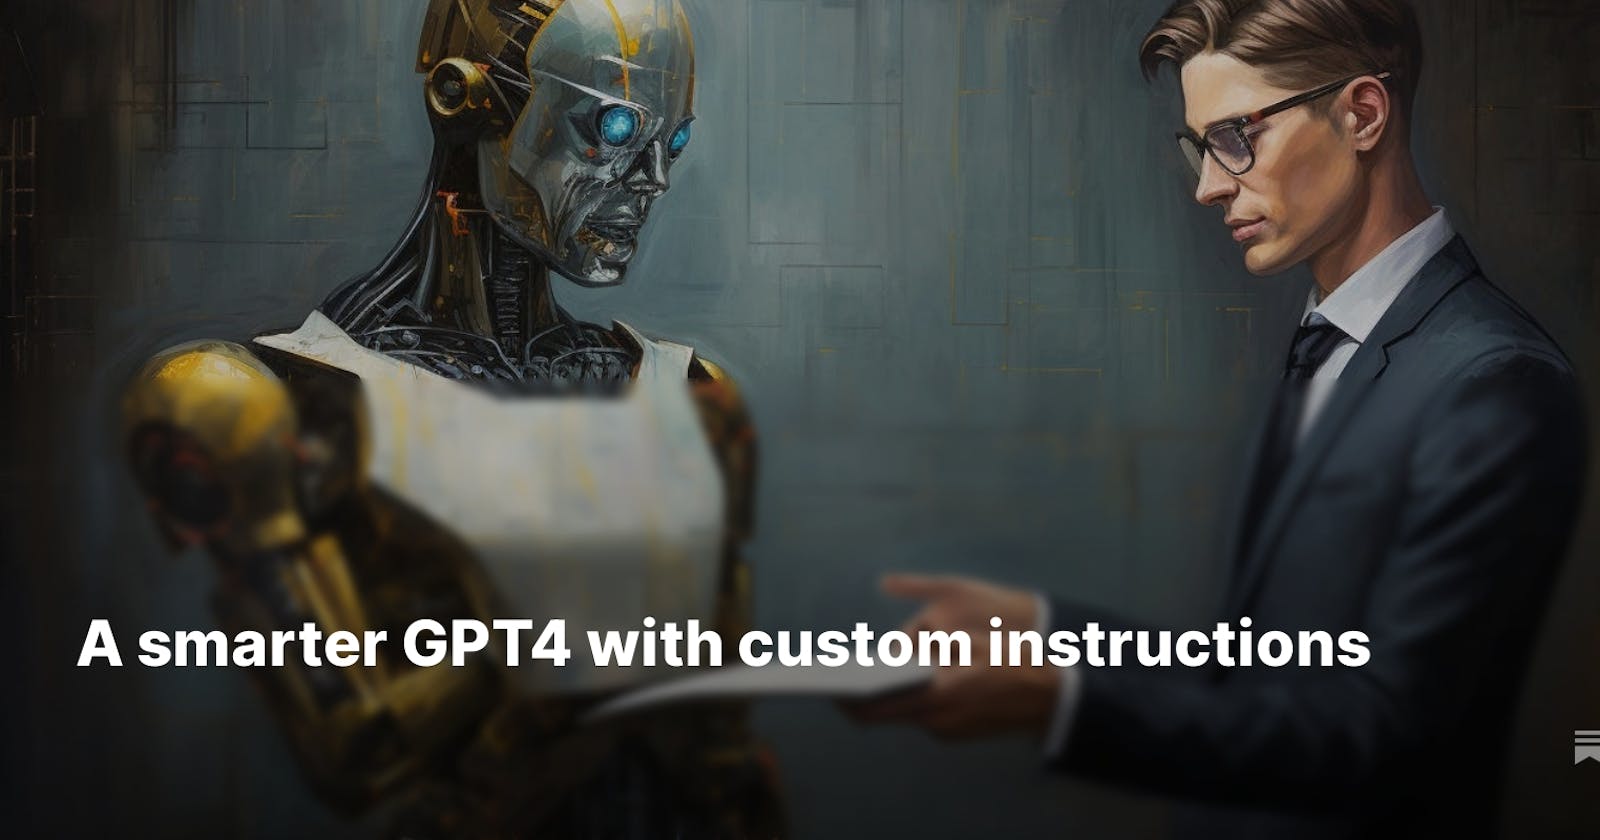 A smarter GPT4 with custom instructions